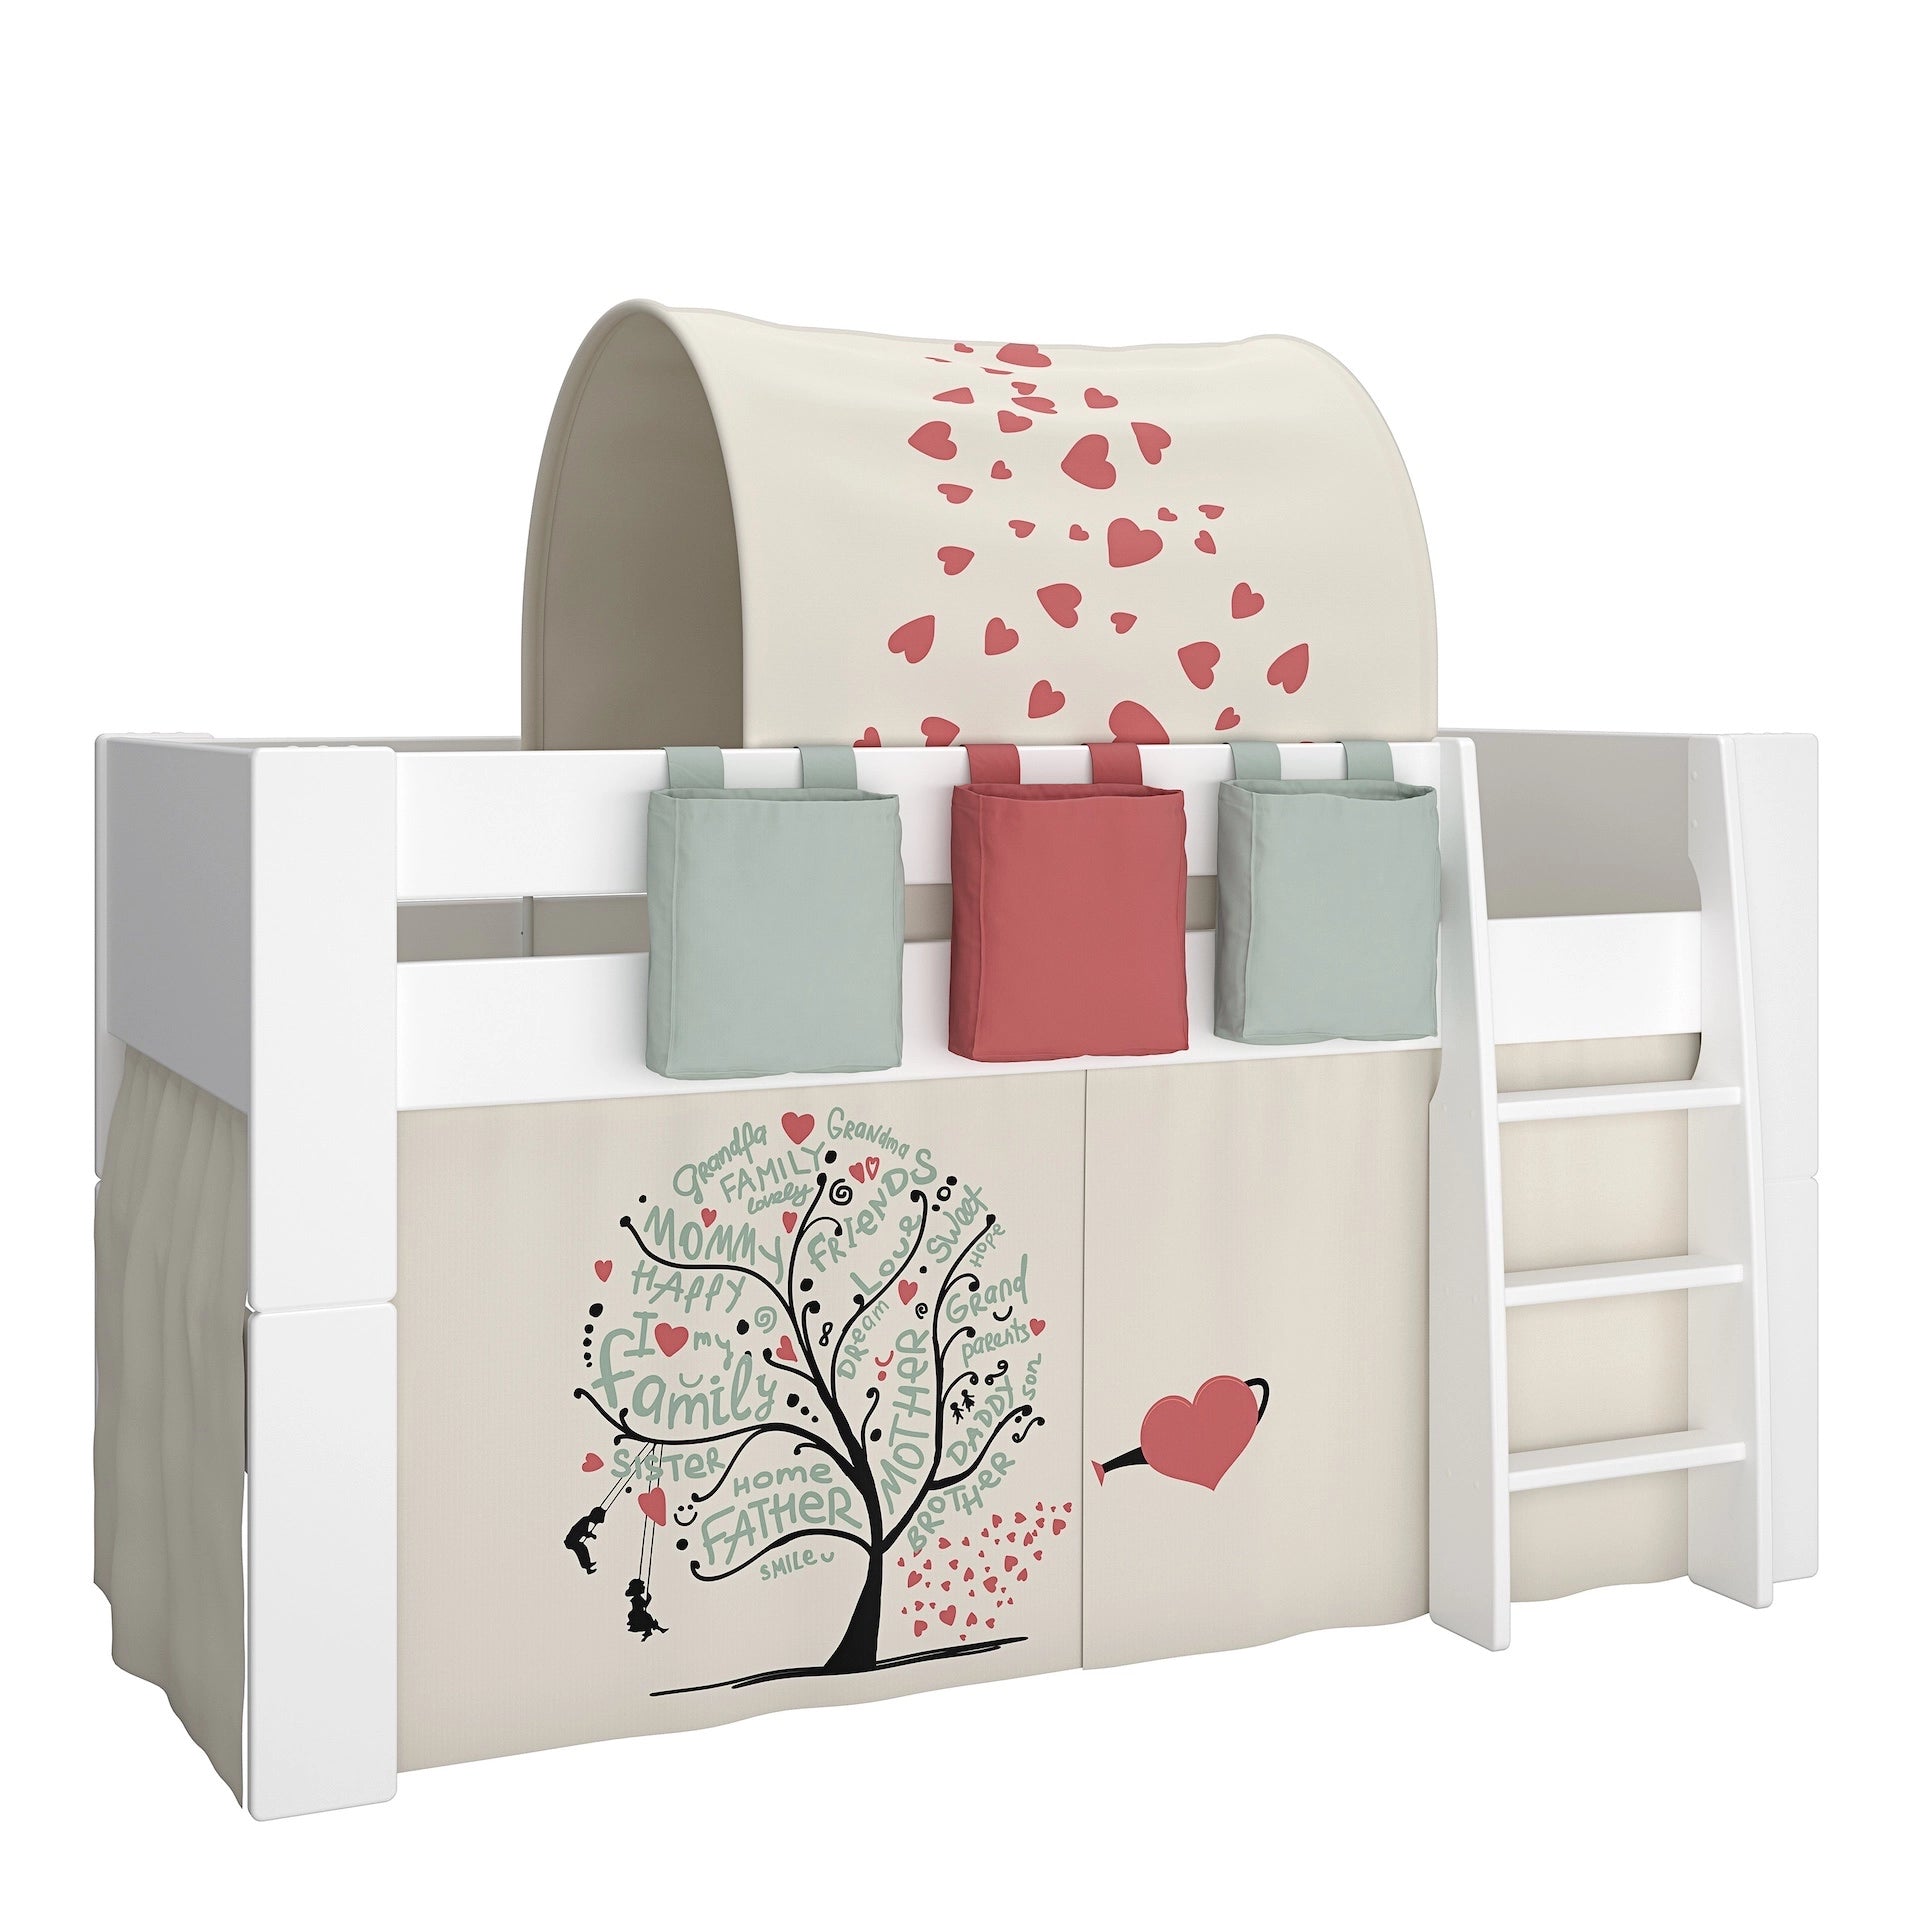 Furniture To Go Steens For Kids Mid Sleeper in Folkestone Grey, Includes - Tree of Life Tent + Tunnel + 2 Pockets in Green + 1 Pocket in Red